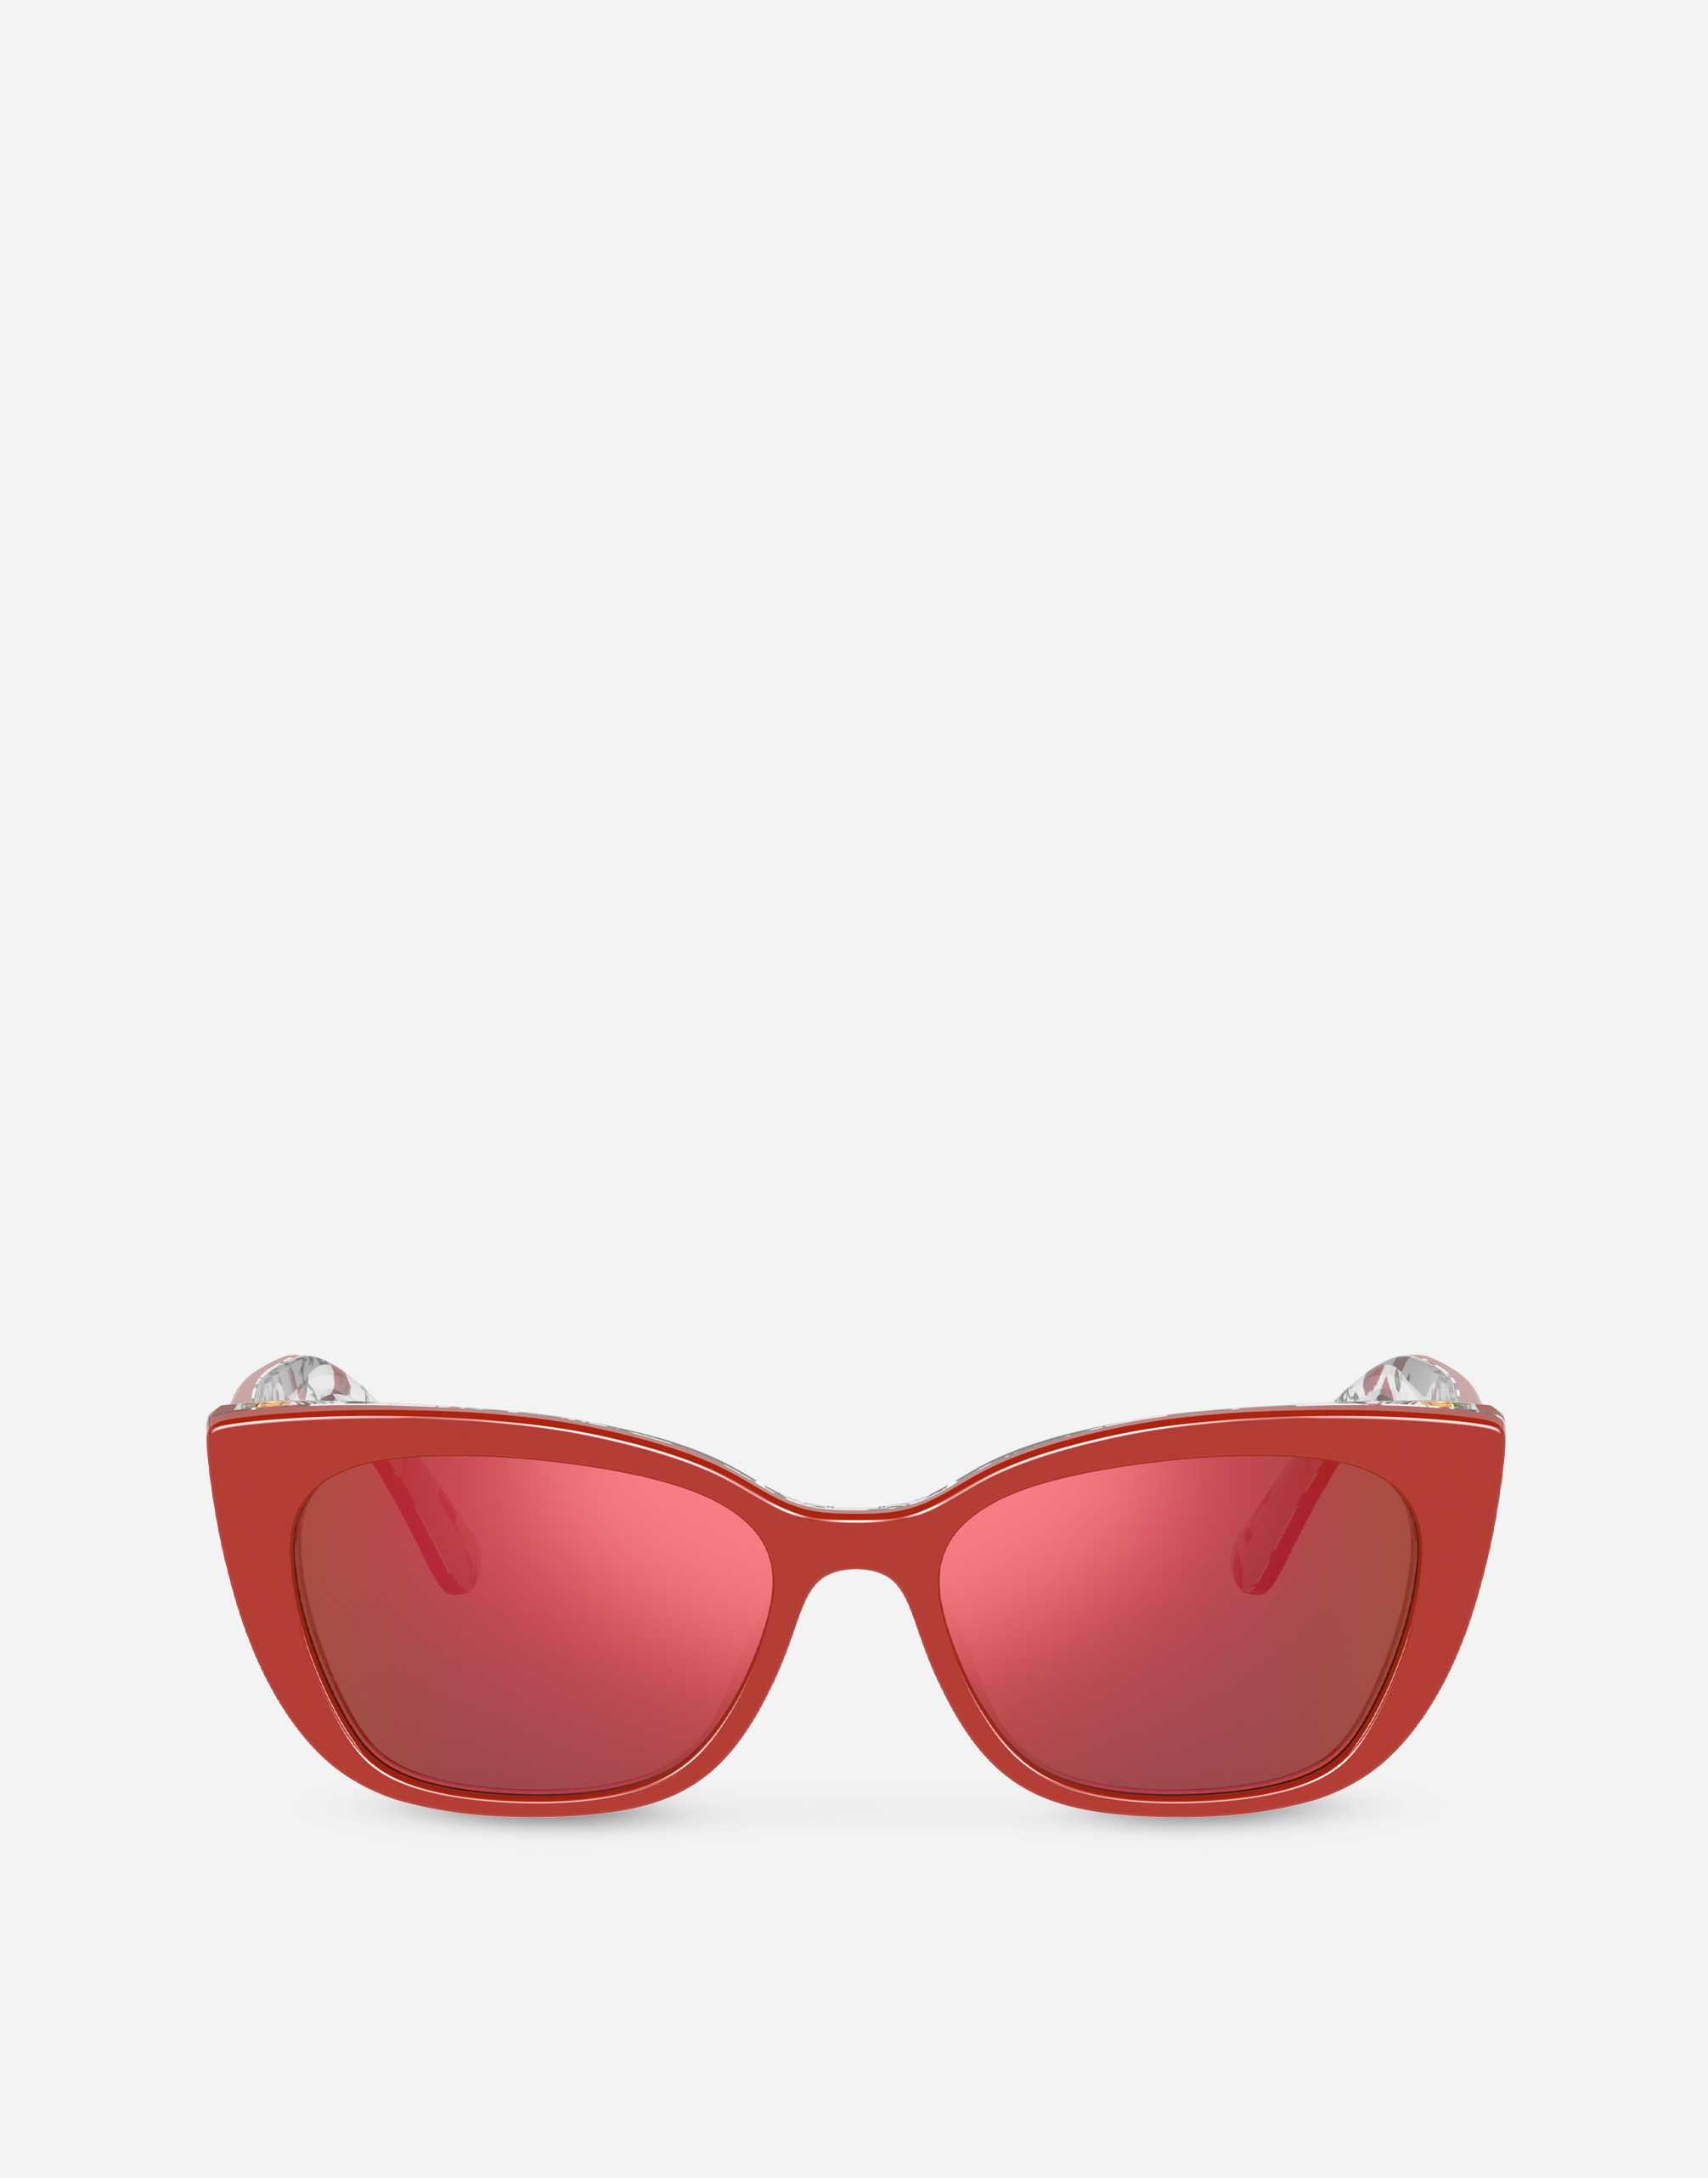 Happy Garden Sunglasses in Red on flowers print